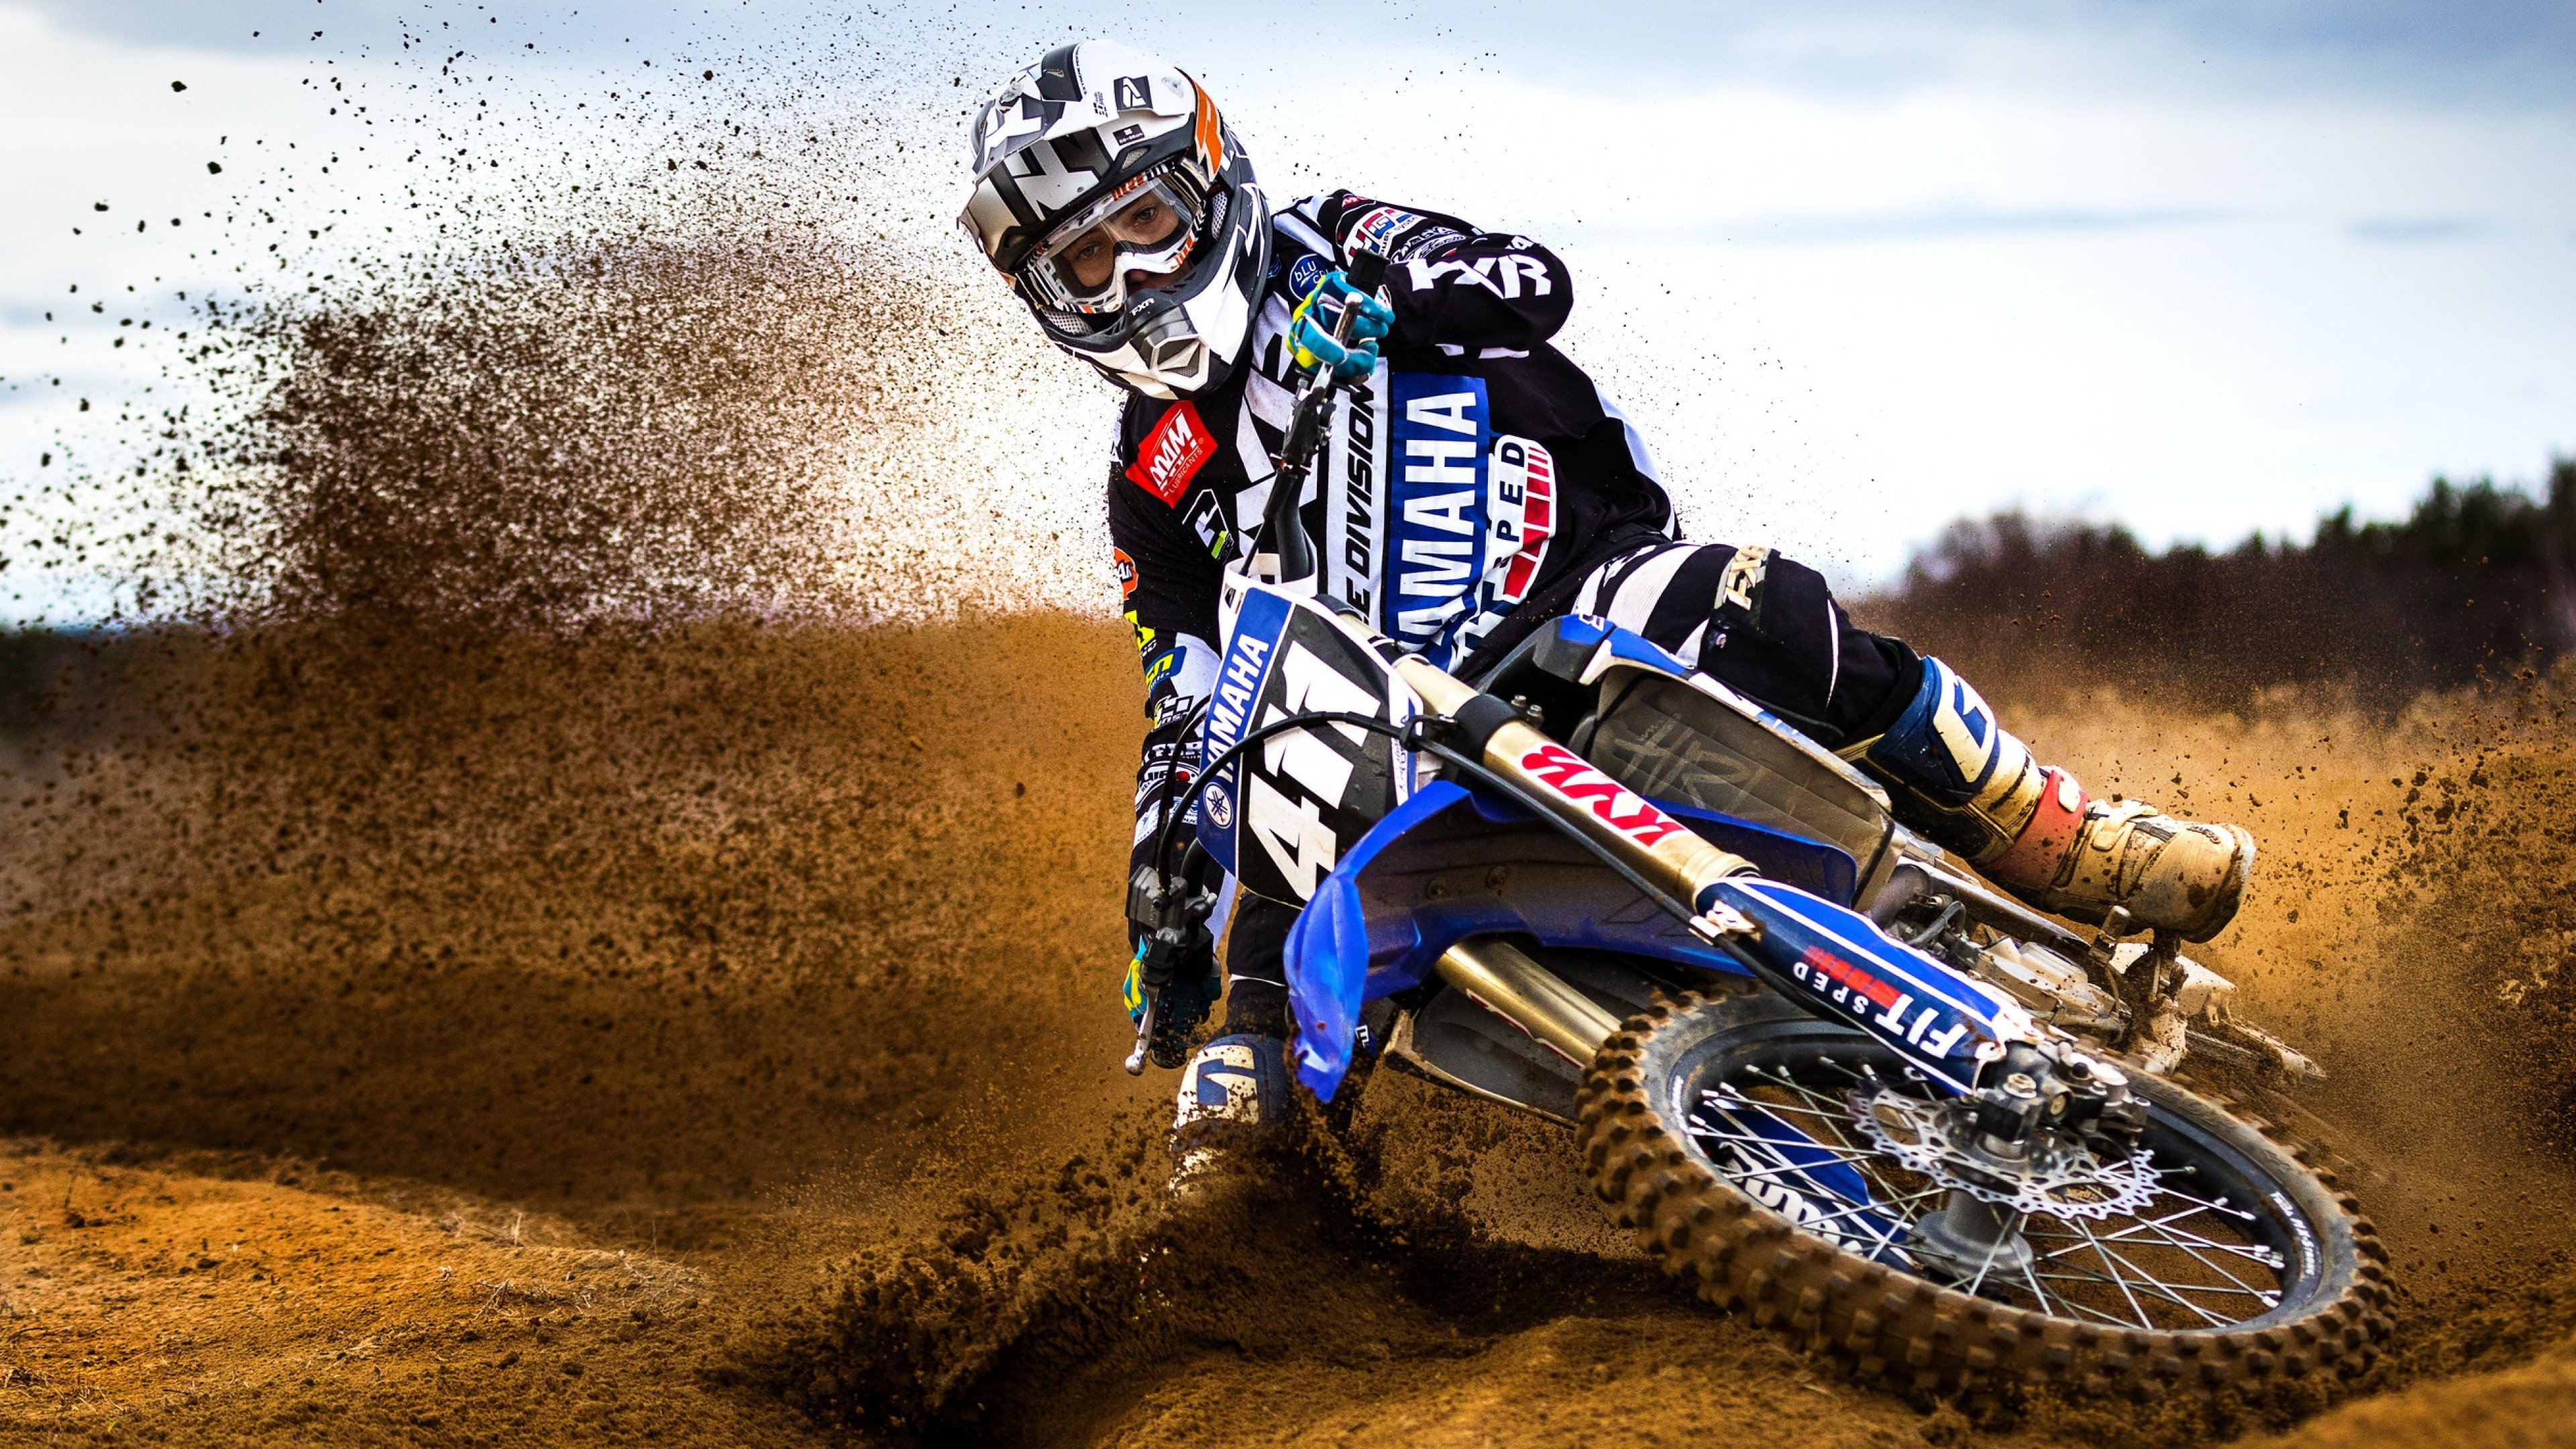 Motocross: Races Always Holding On Enclosed Off-Road Circuits, Motorcycling. 3840x2160 4K Background.